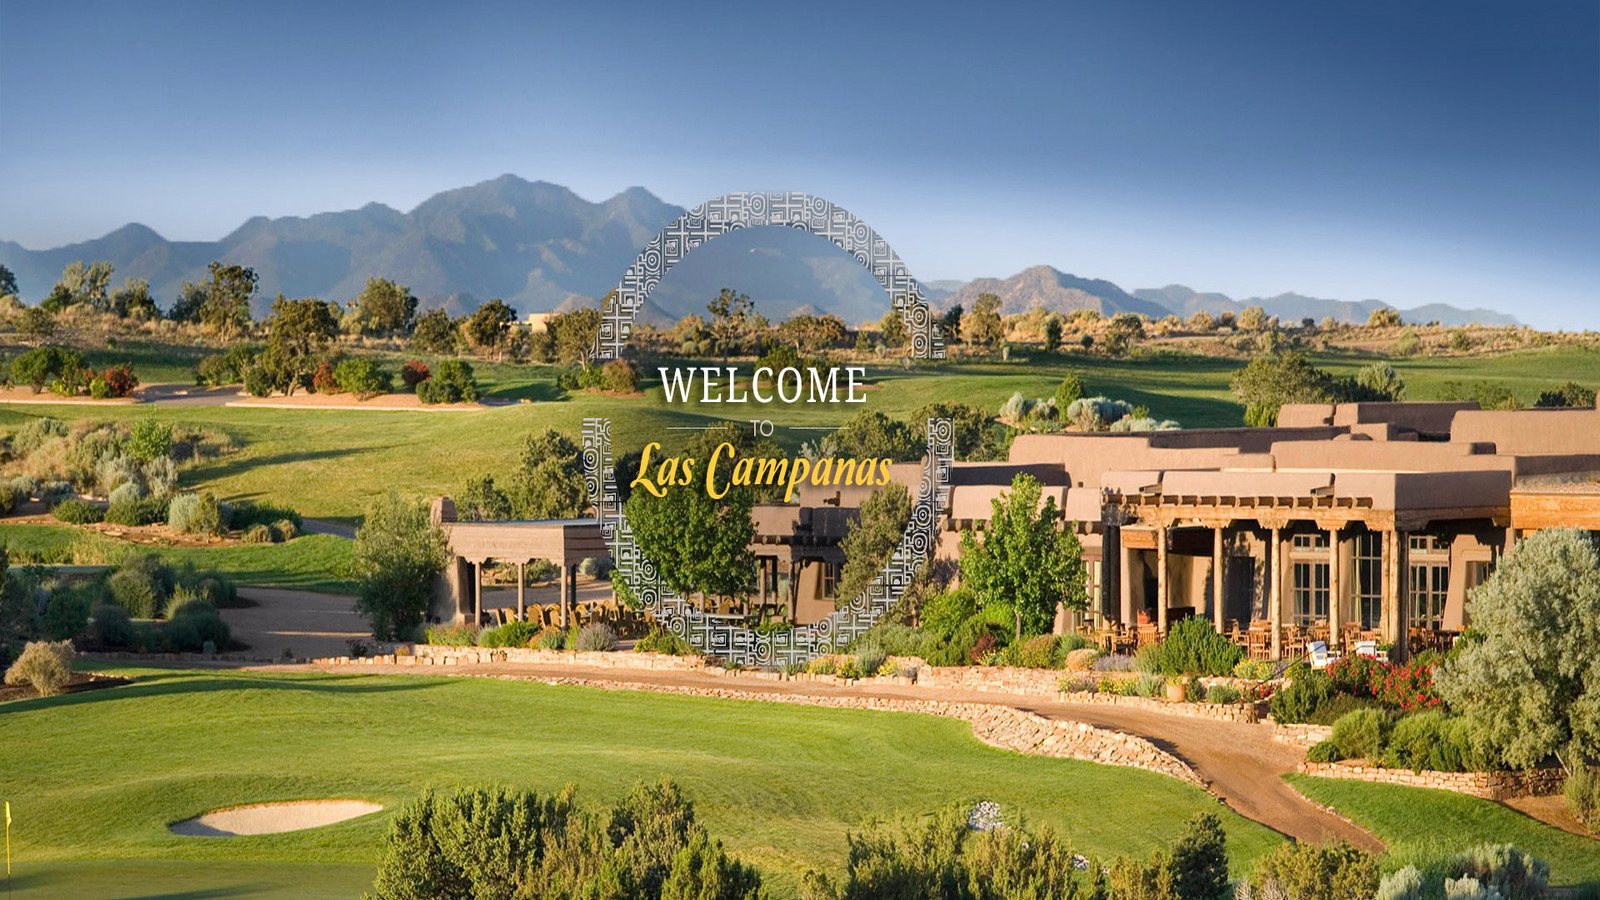 Things to Do in Las Campanas